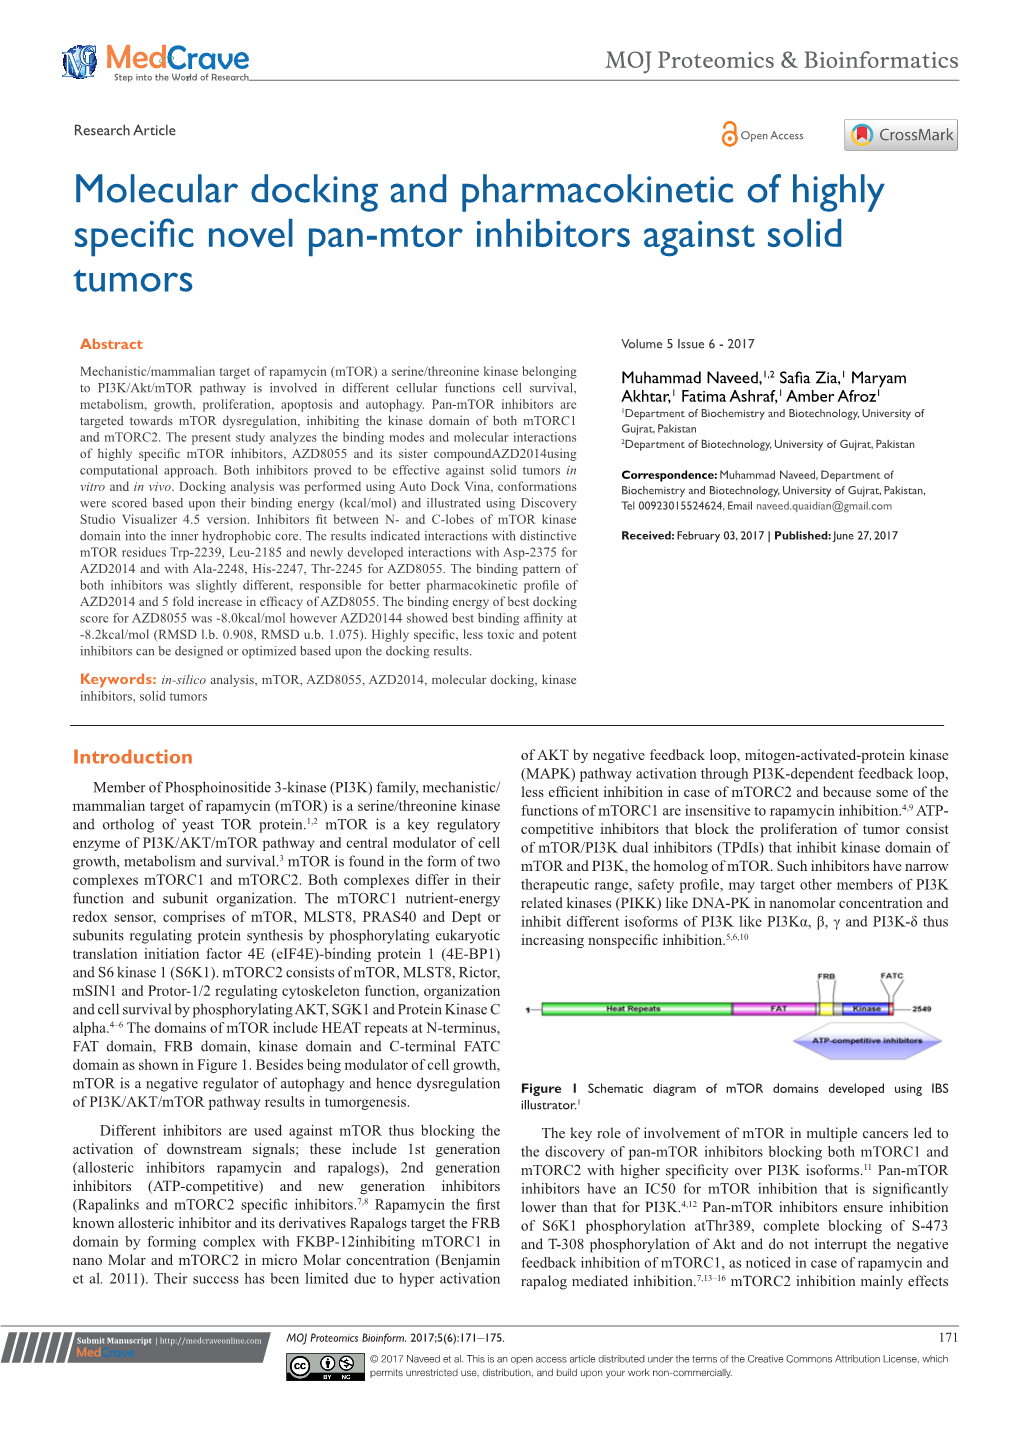 Molecular Docking and Pharmacokinetic of Highly Specific Novel Pan-Mtor Inhibitors Against Solid Tumors